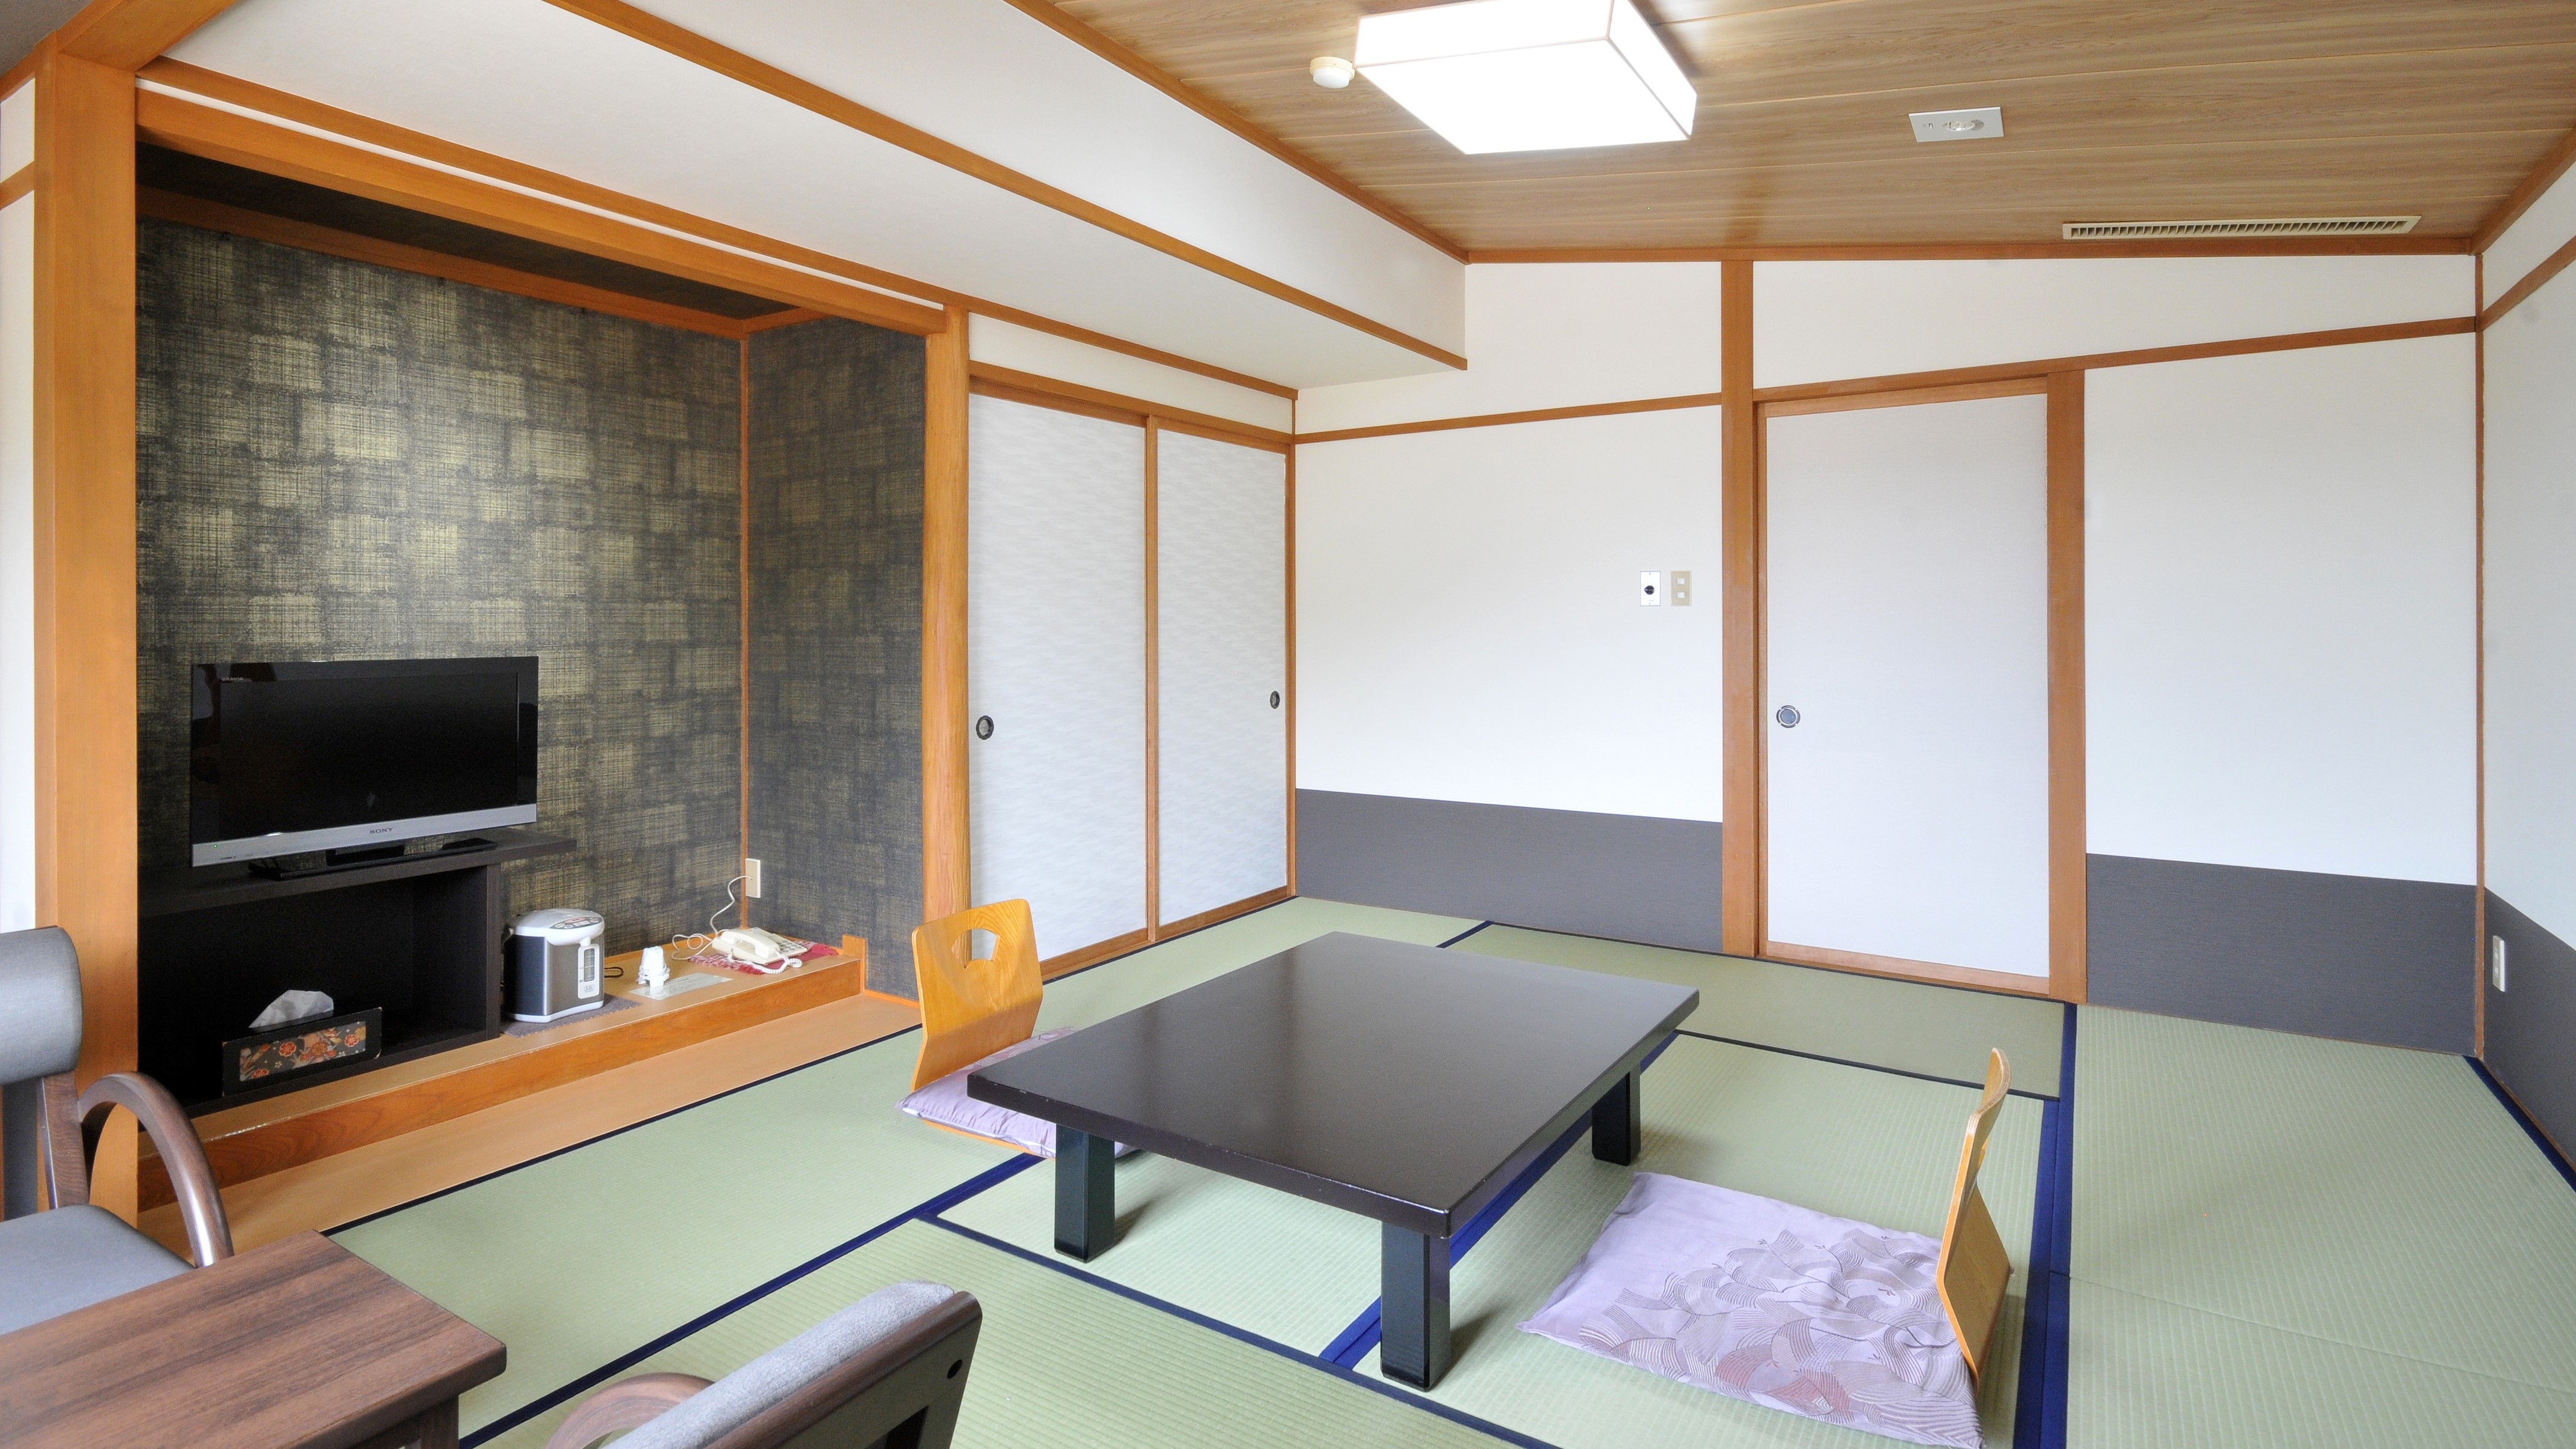 Japanese-style room 8 tatami mats * All rooms are non-smoking * Bath and toilet included